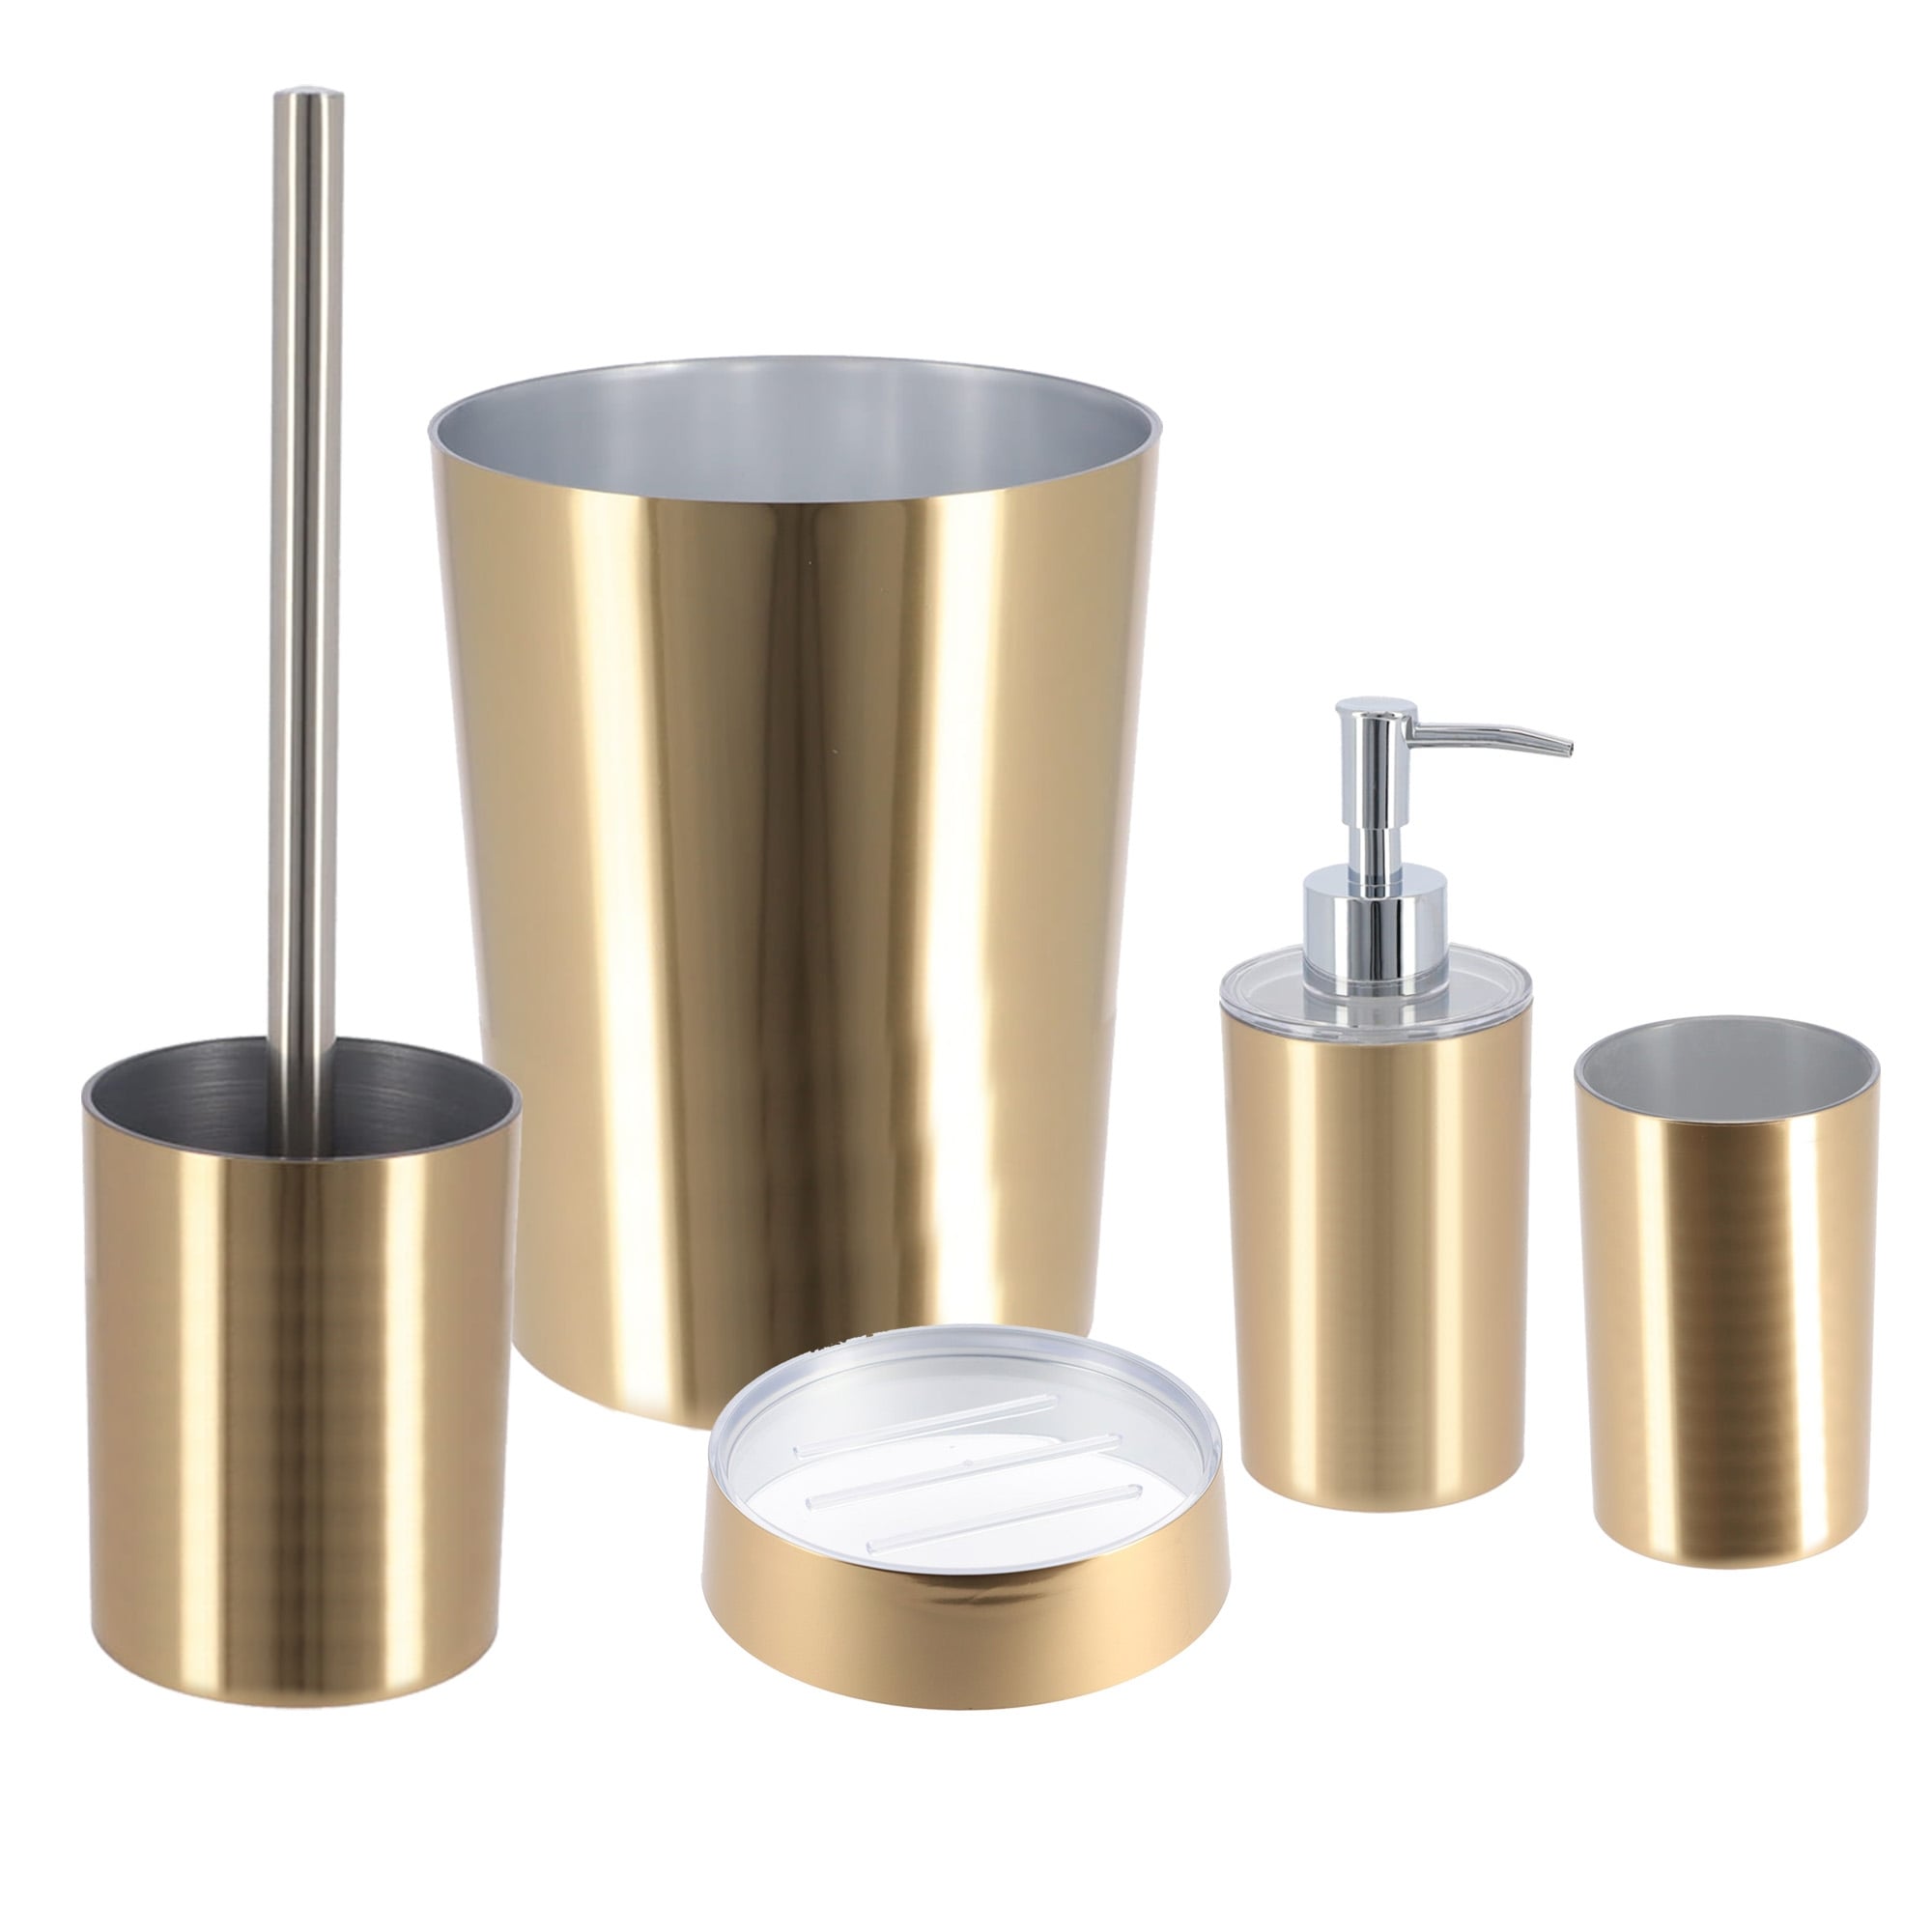 https://ak1.ostkcdn.com/images/products/is/images/direct/ab5ed1e9f671f997702b597c0c0f08a541645a5b/Brushed-Gold-Bathroom-Accessory-Set.jpg